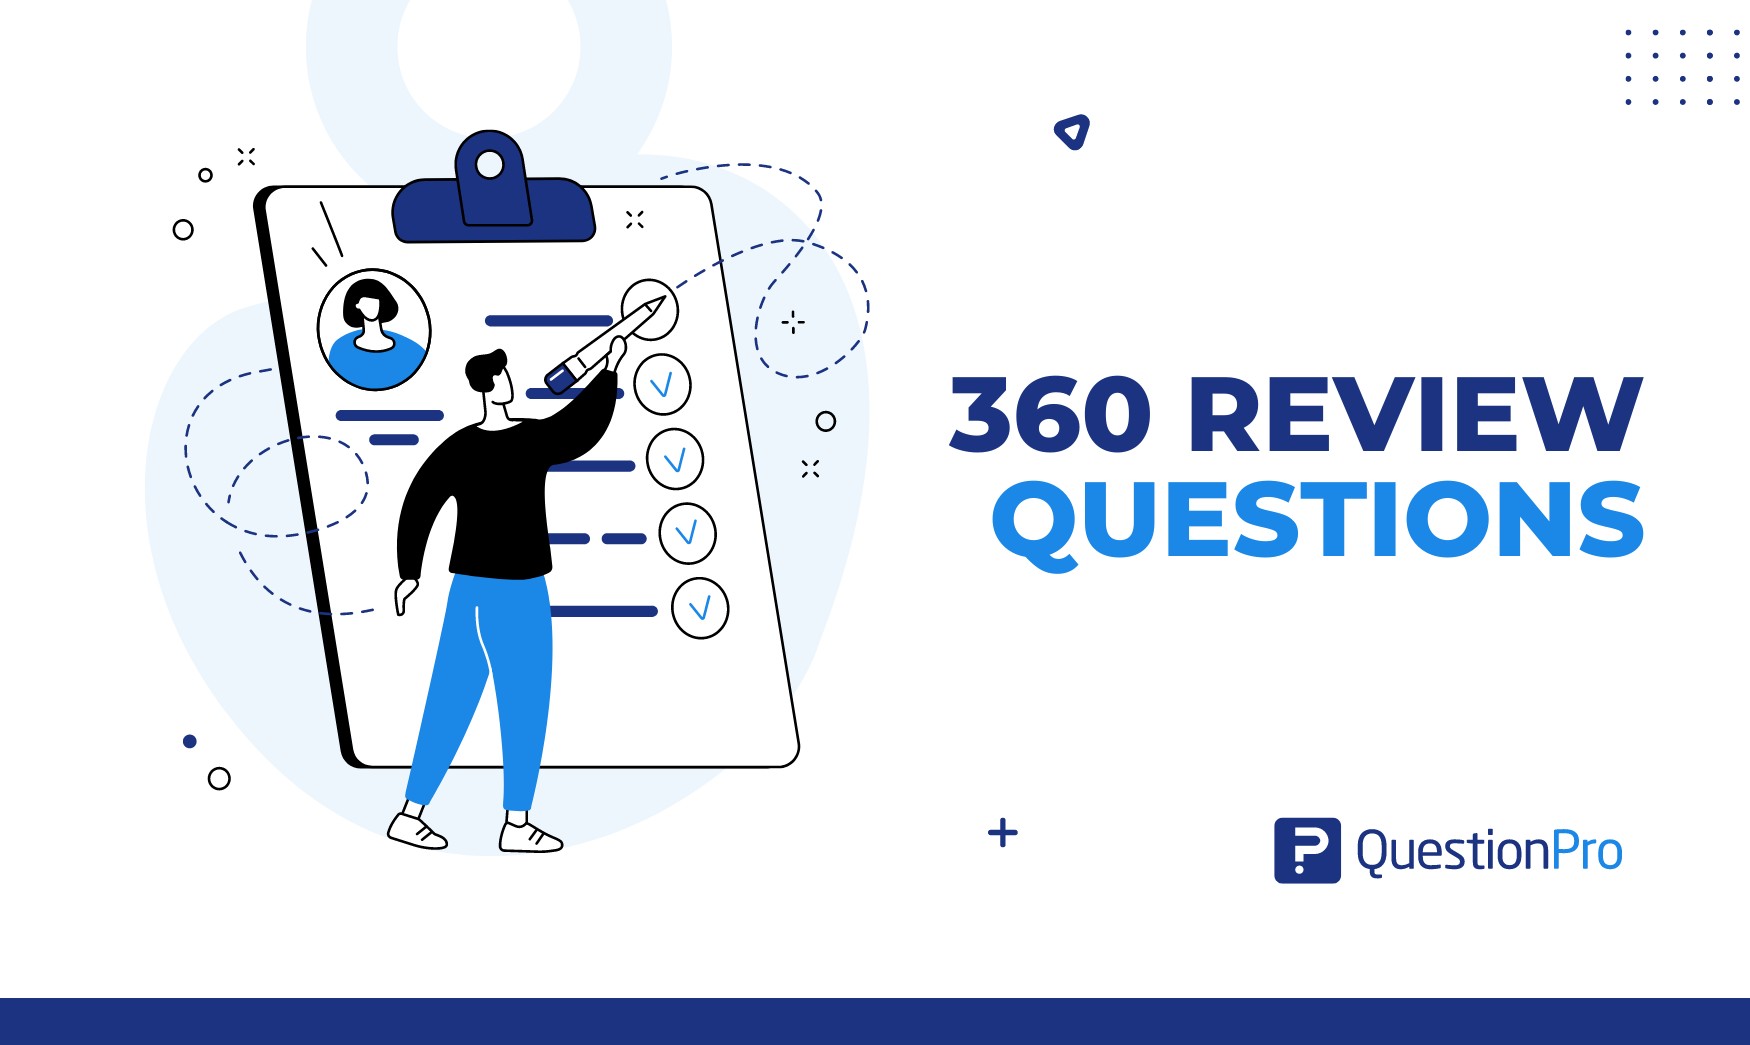 360 review questions